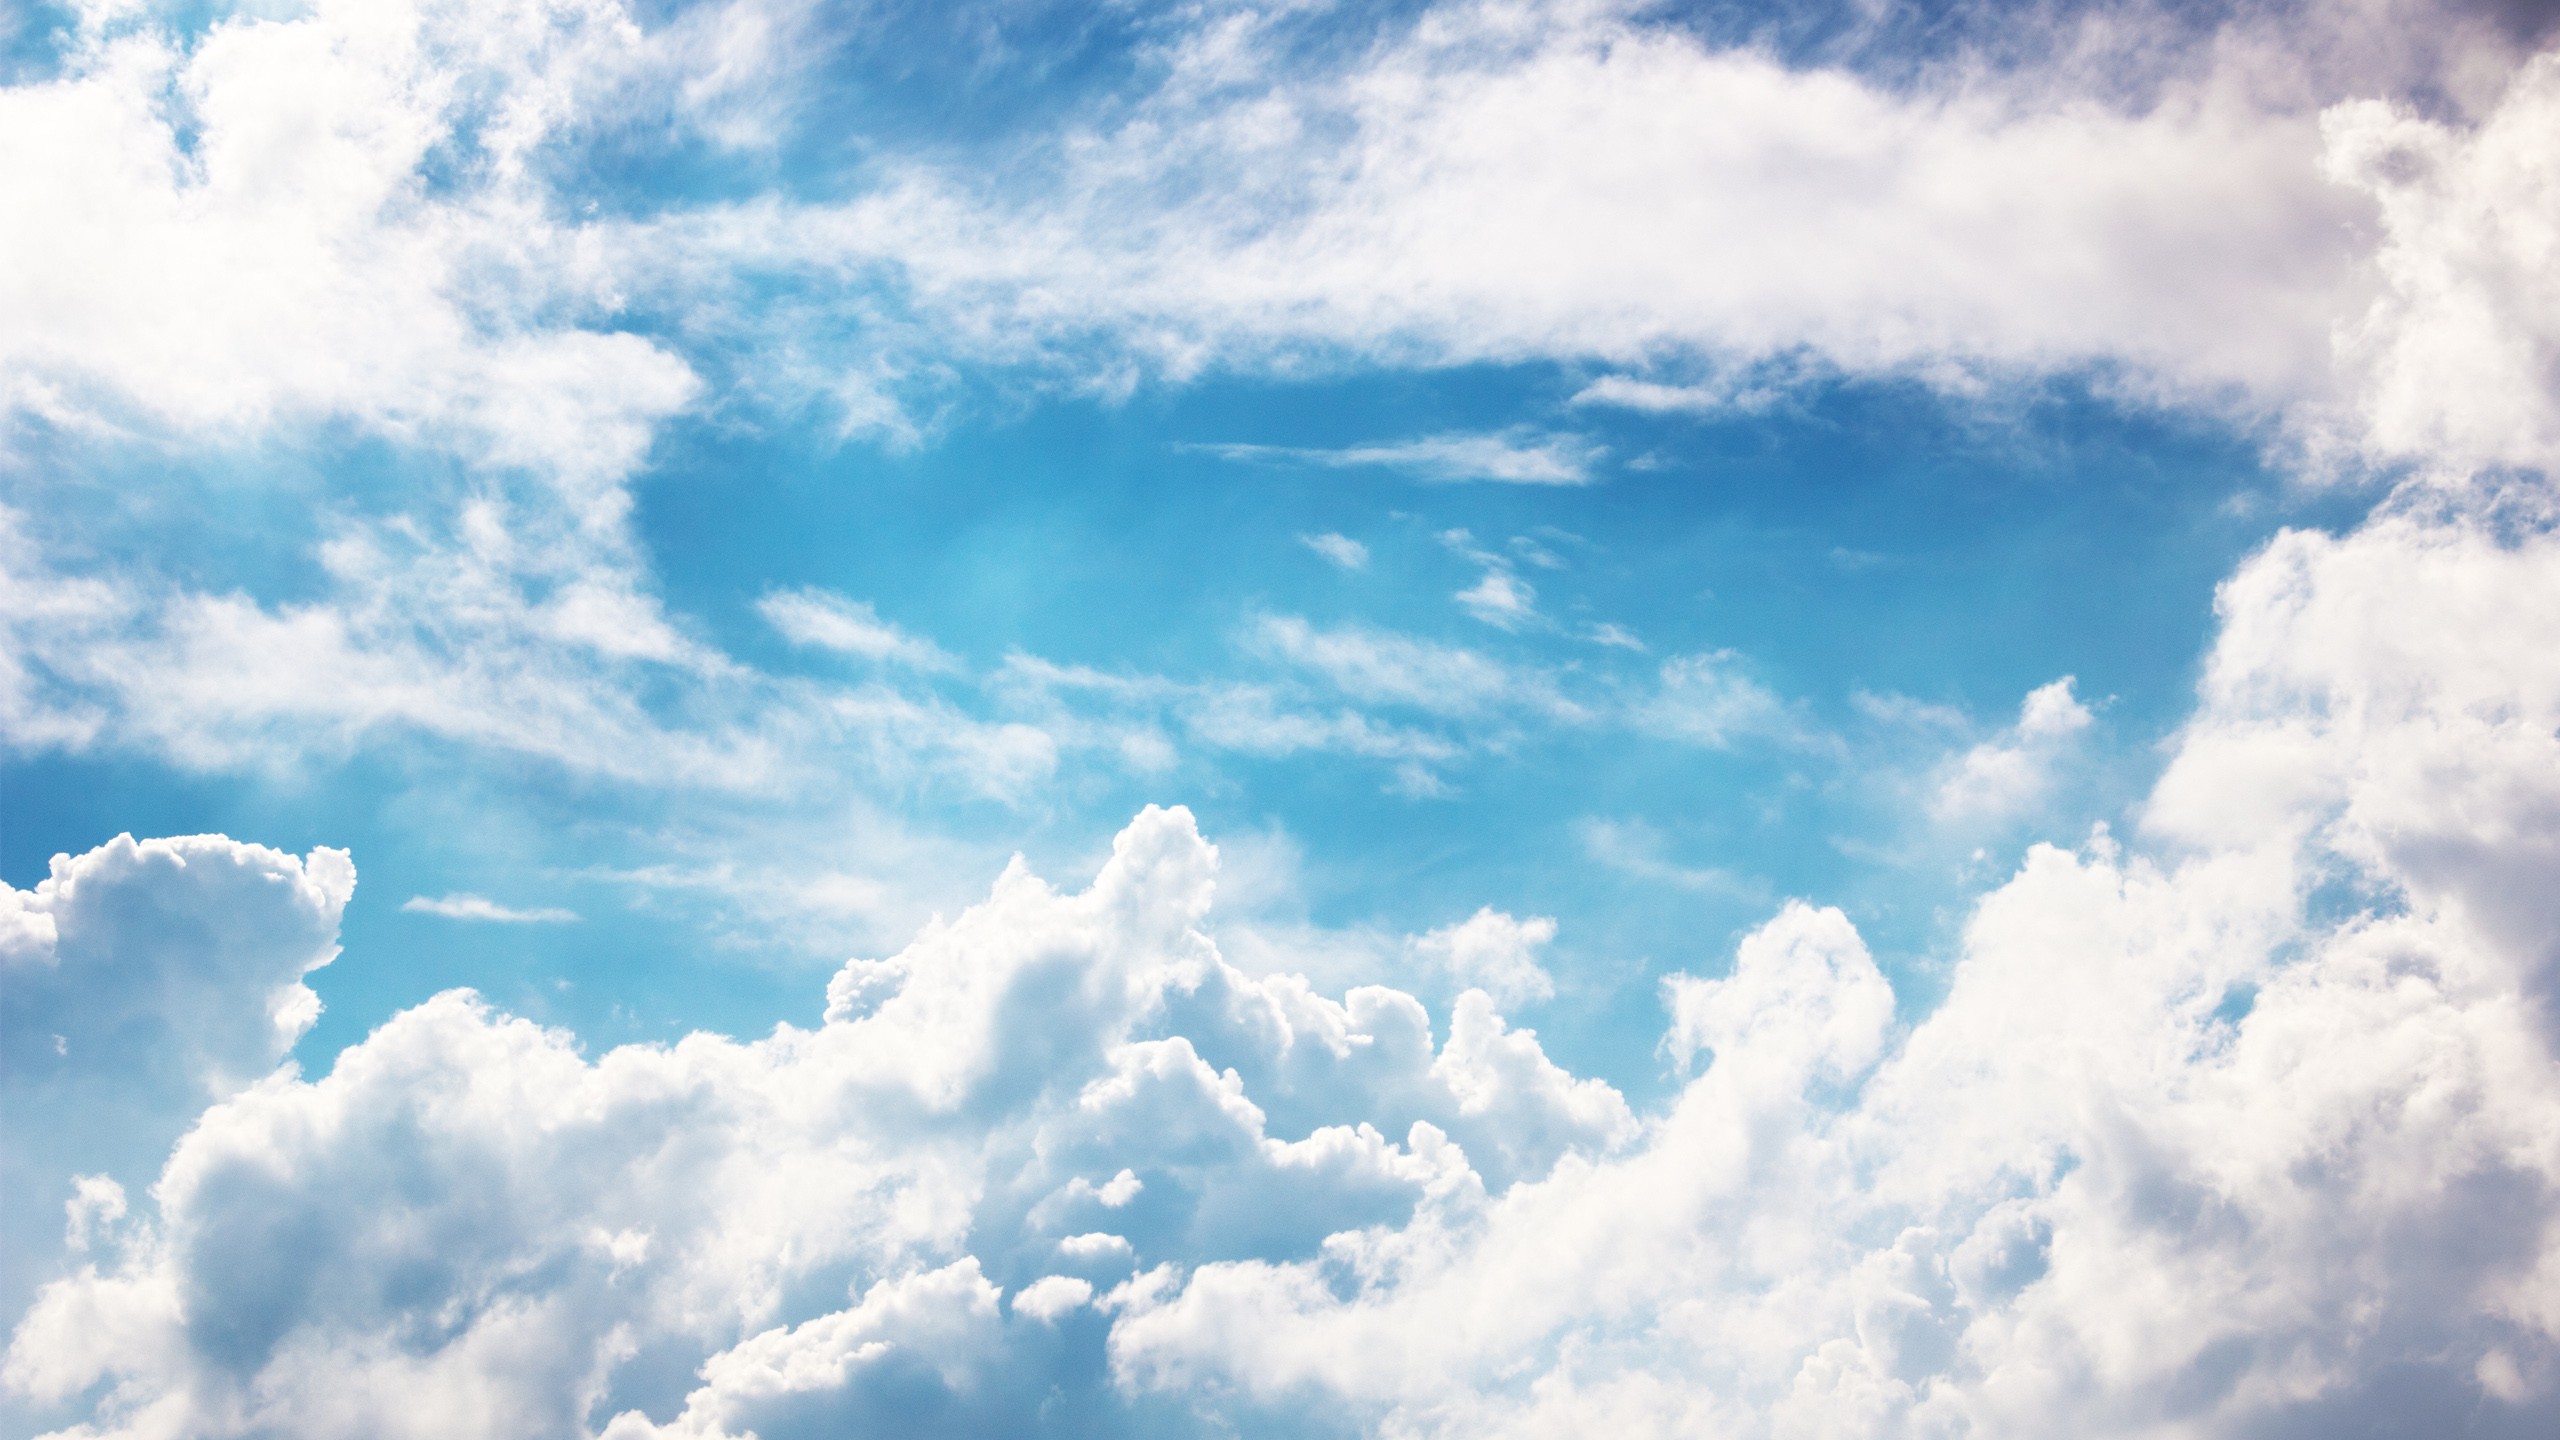 General 2560x1440 clouds sky white nature